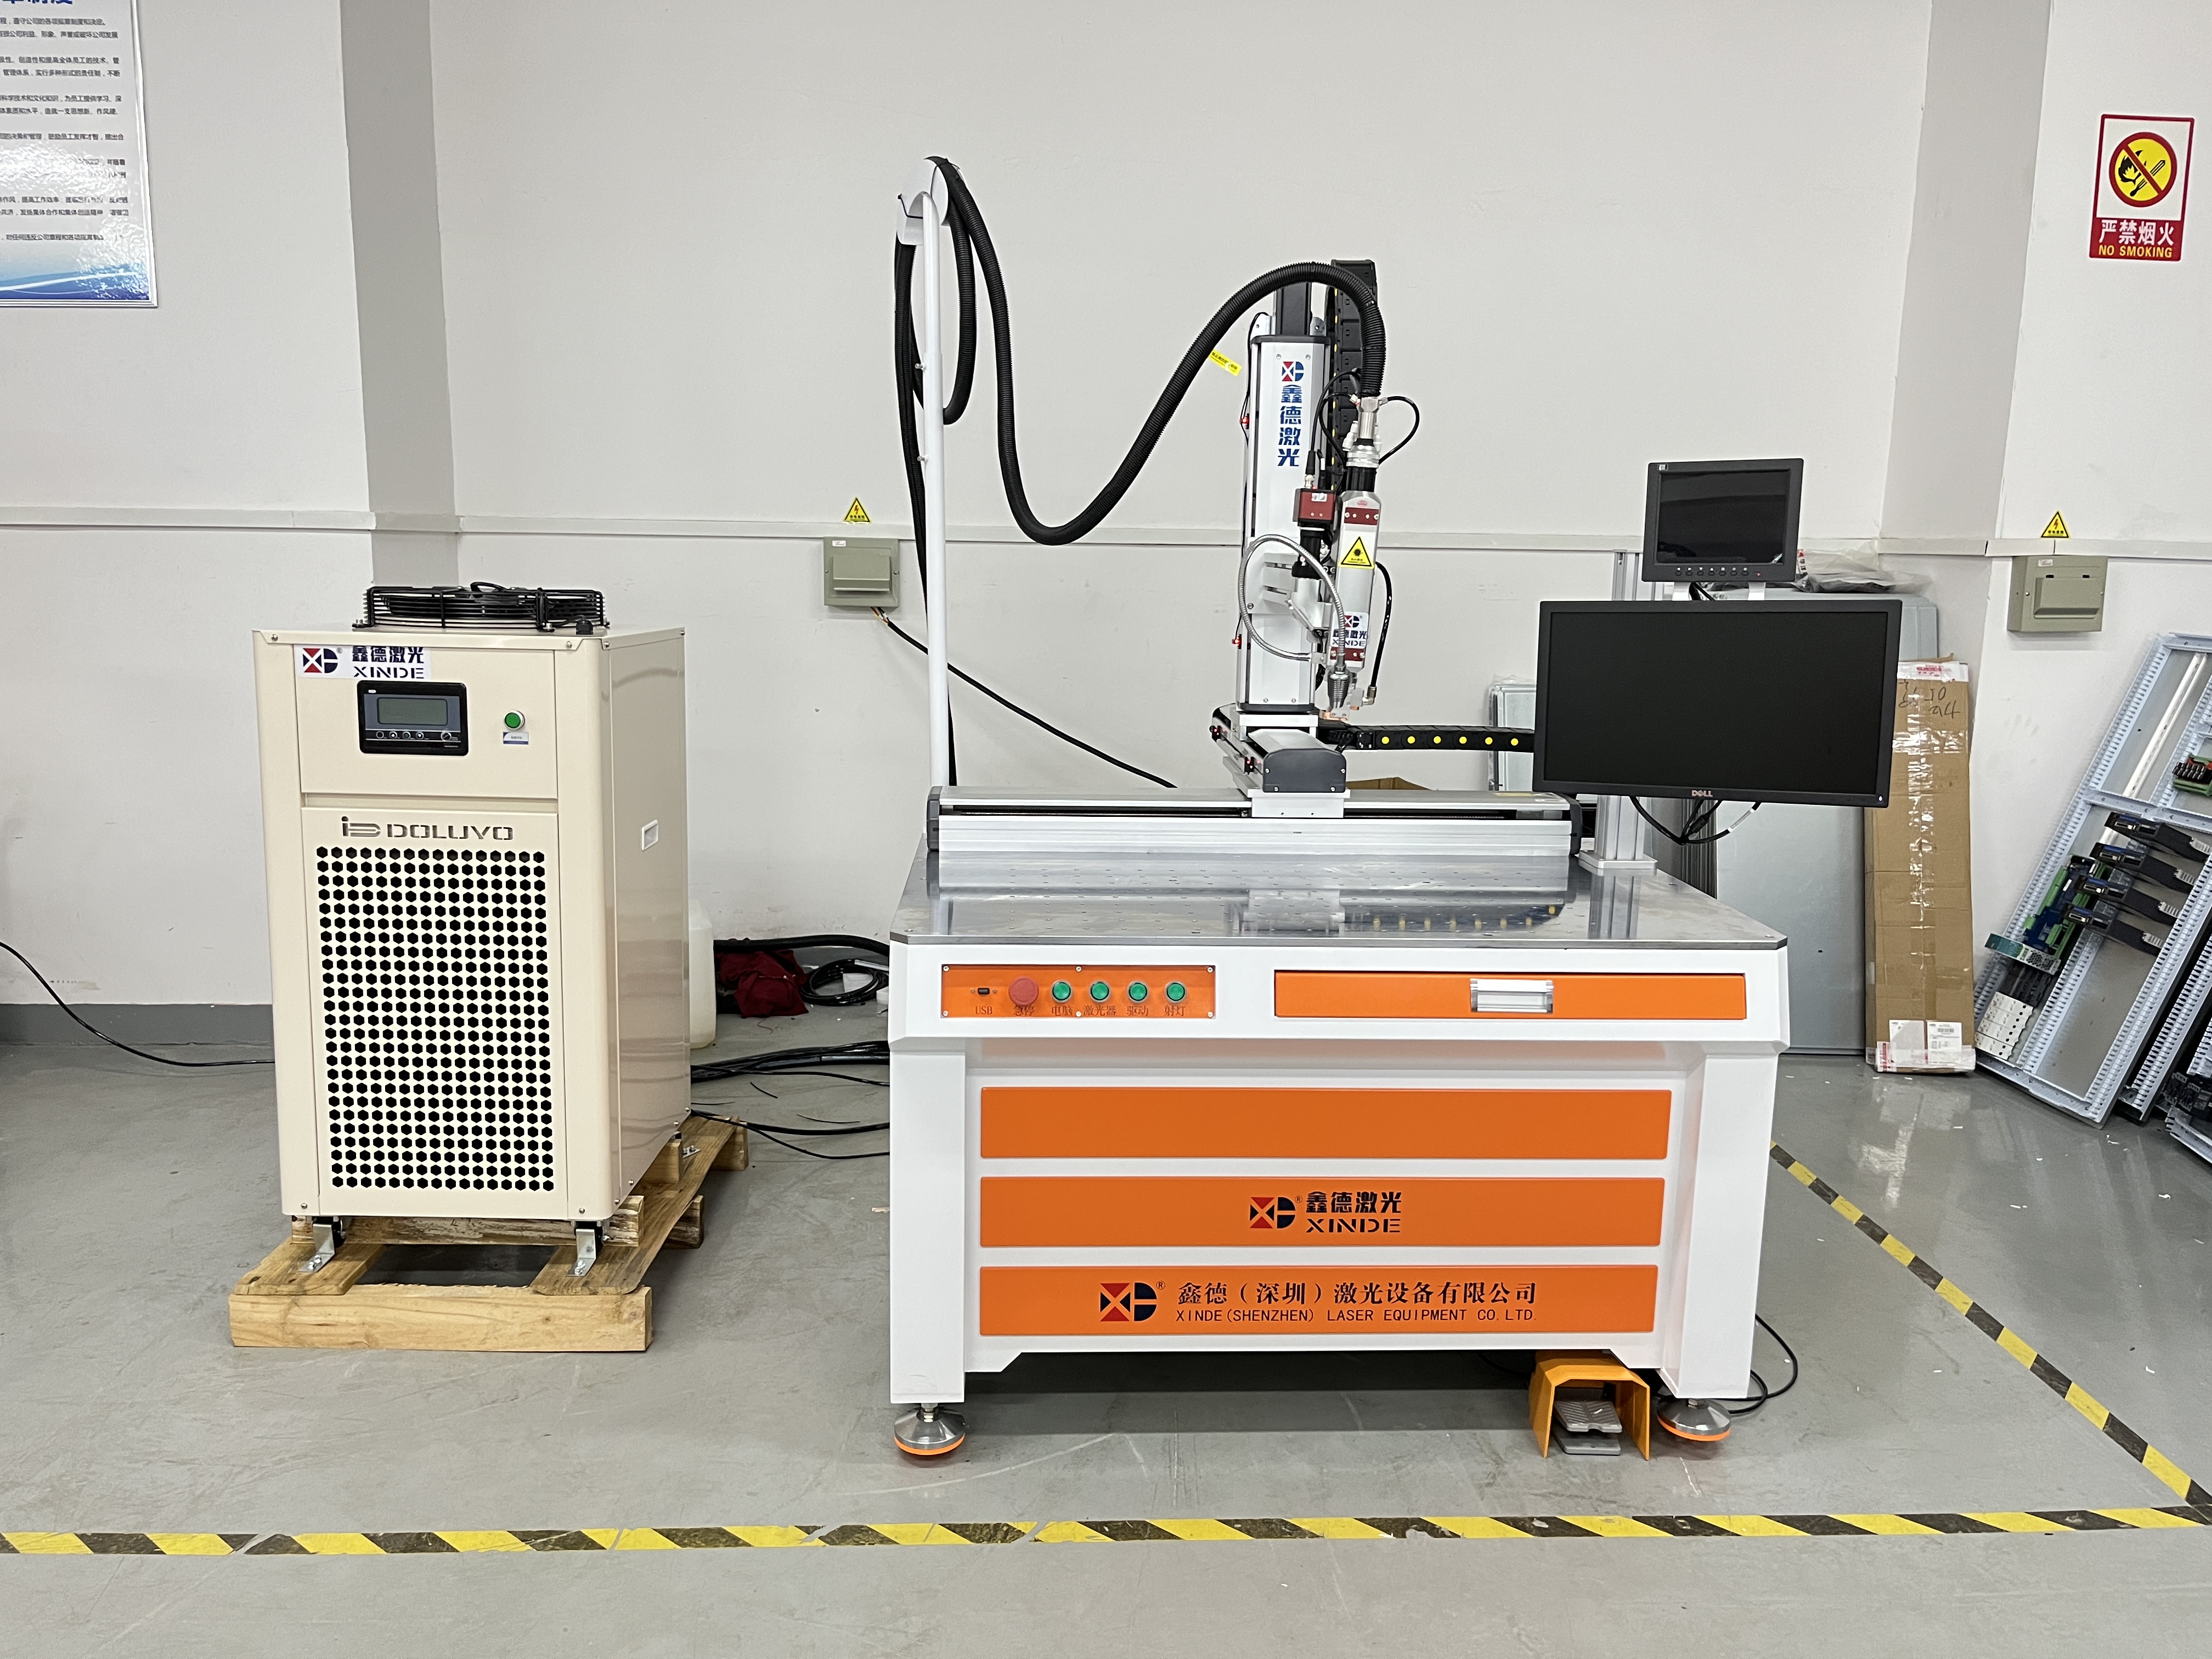 What are the main types of laser welding machines?